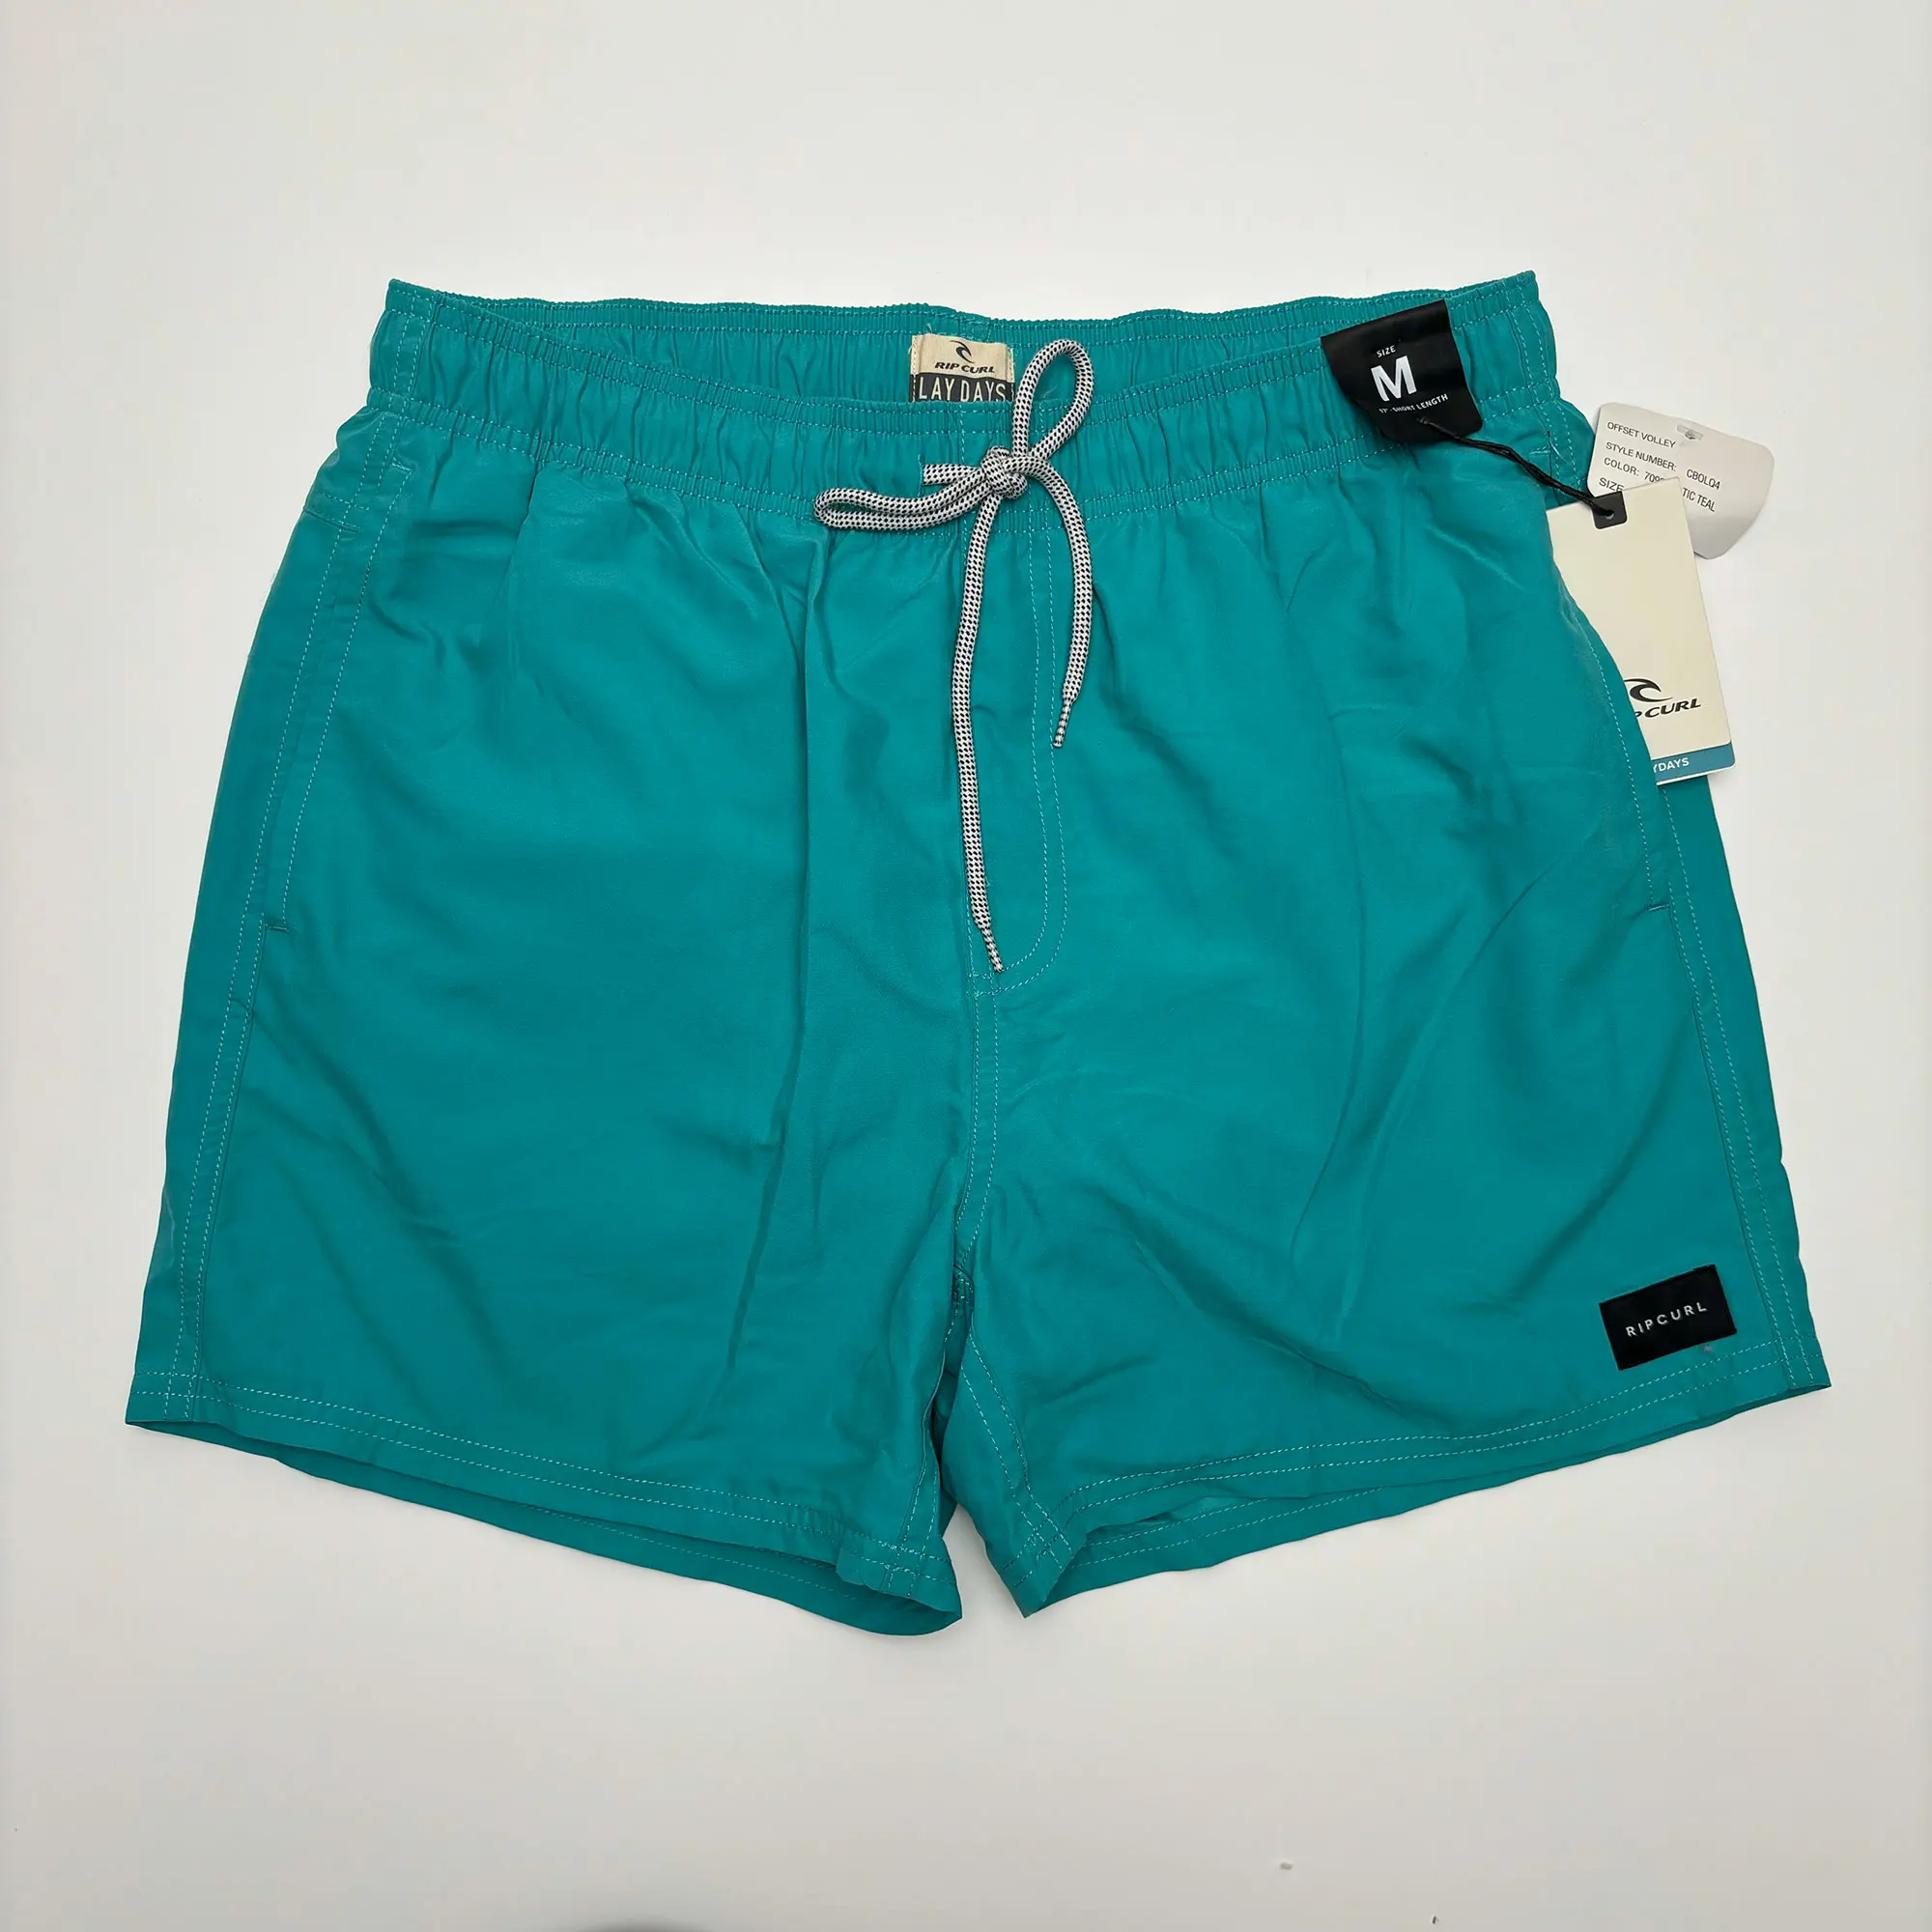 

Size M RIP CURl 17 Inch Men's Volleyball Shorts Mens Surfing Swimming Beach Shorts Bermuda Shorts Two Side Pocket Inside Net